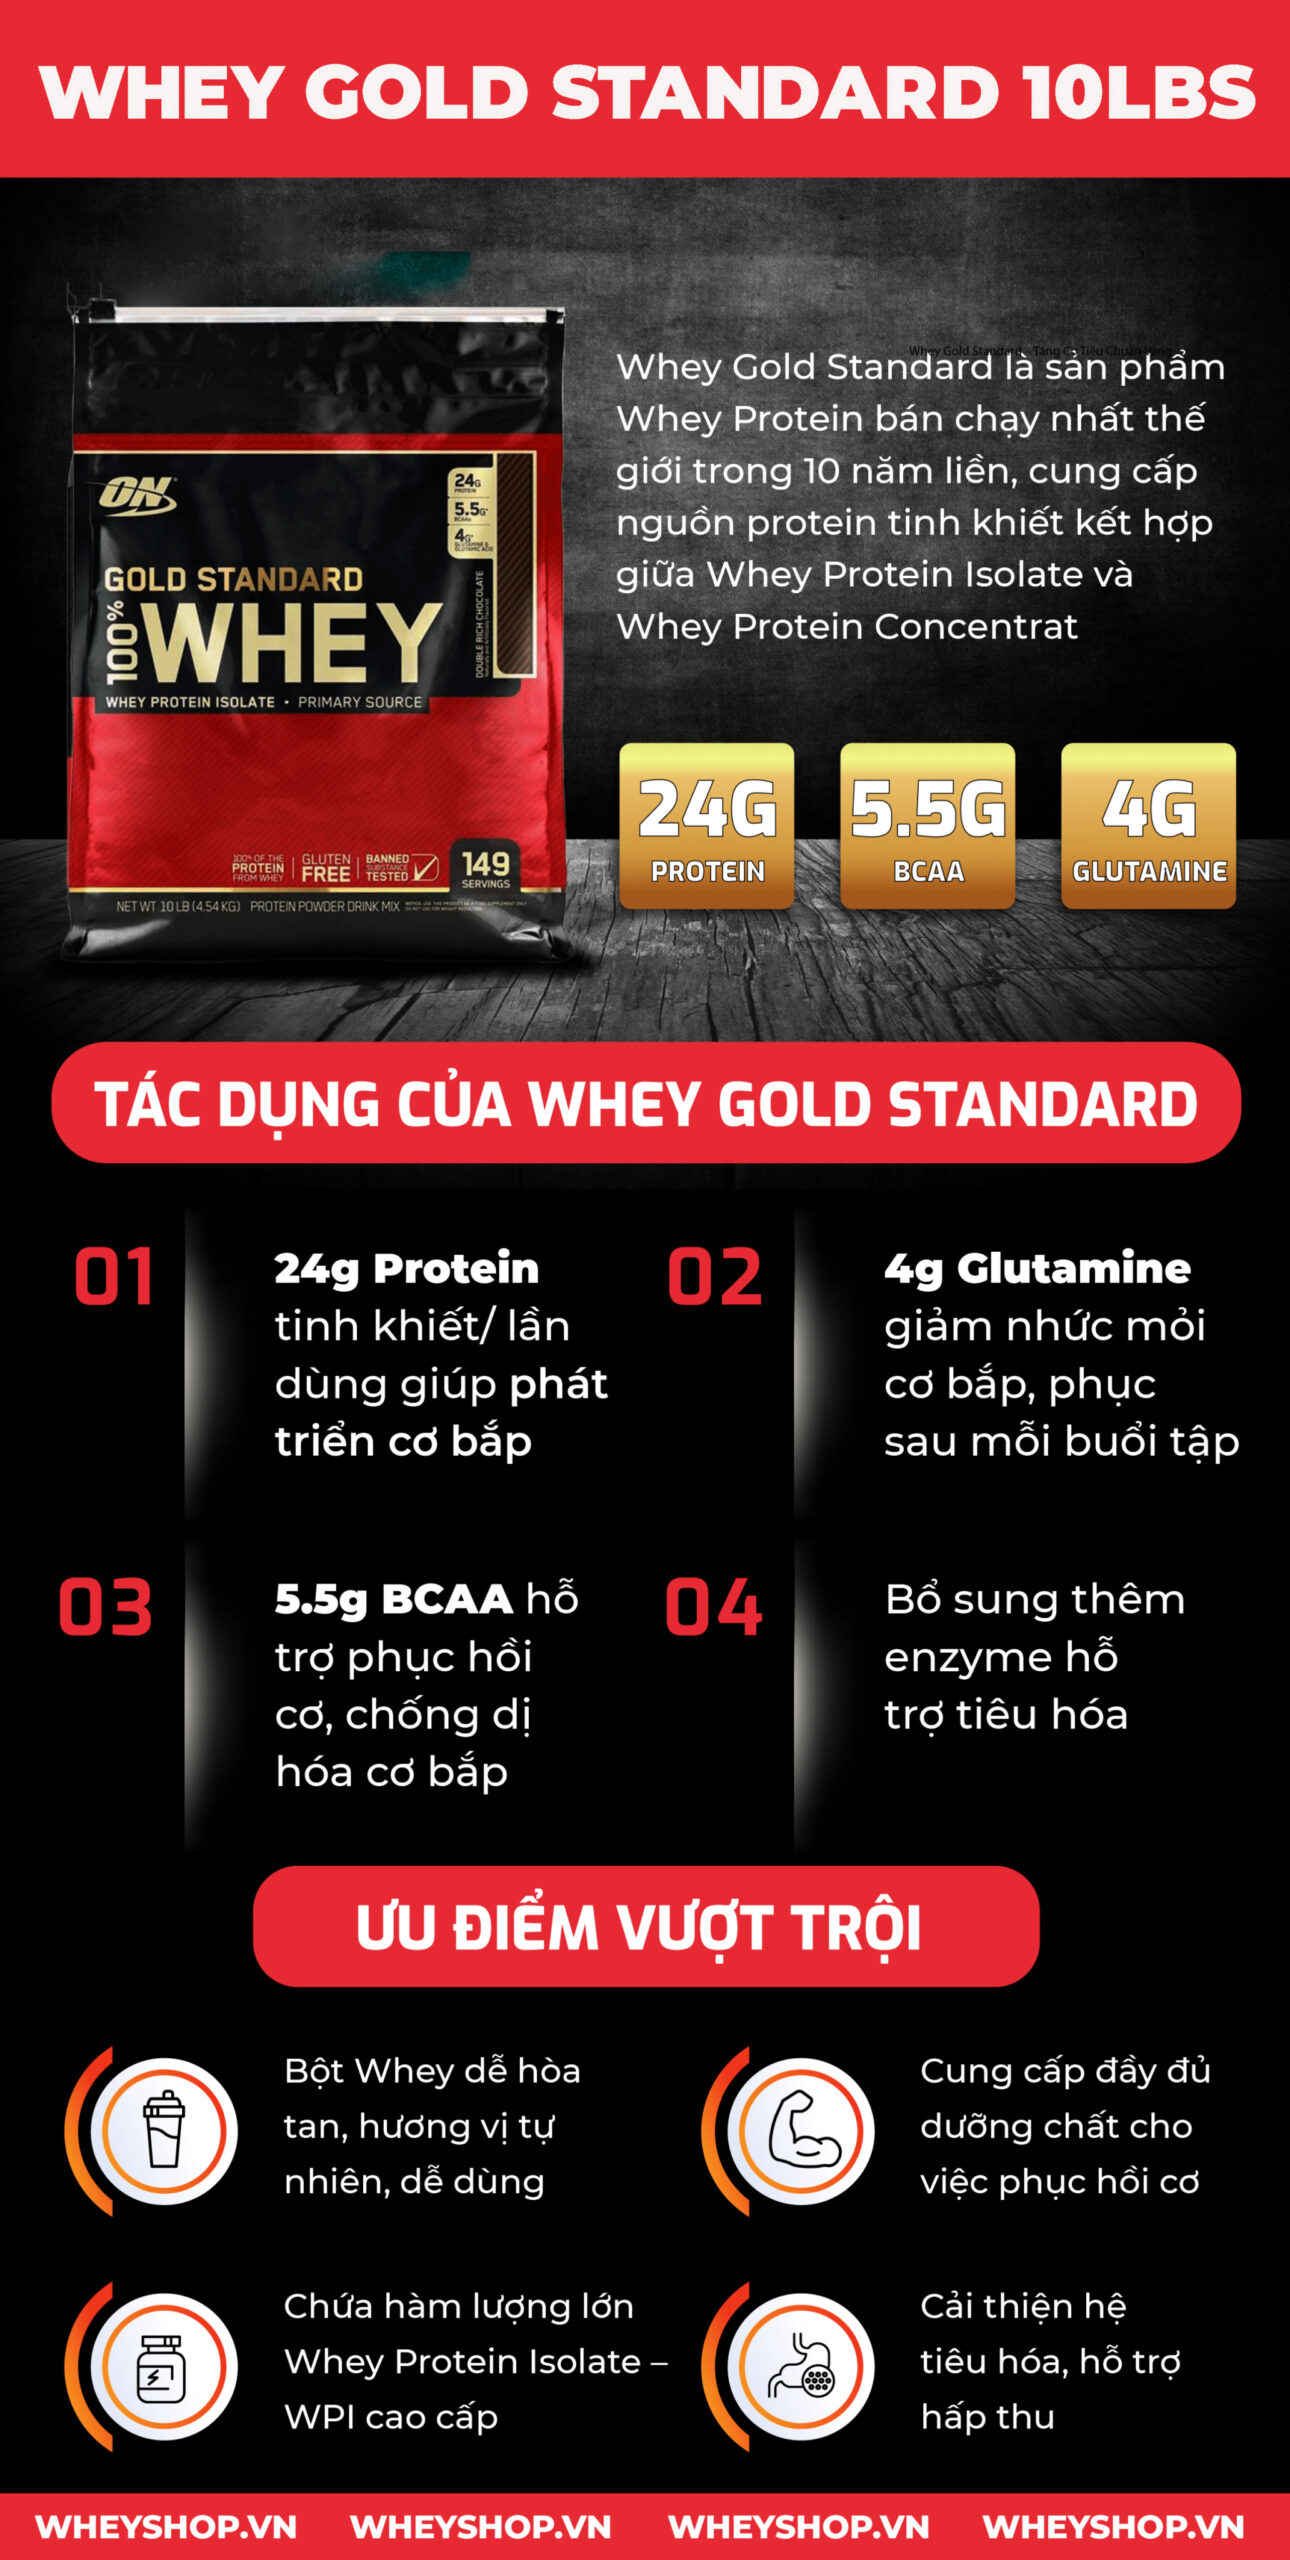 WHEY GOLD 10LBS